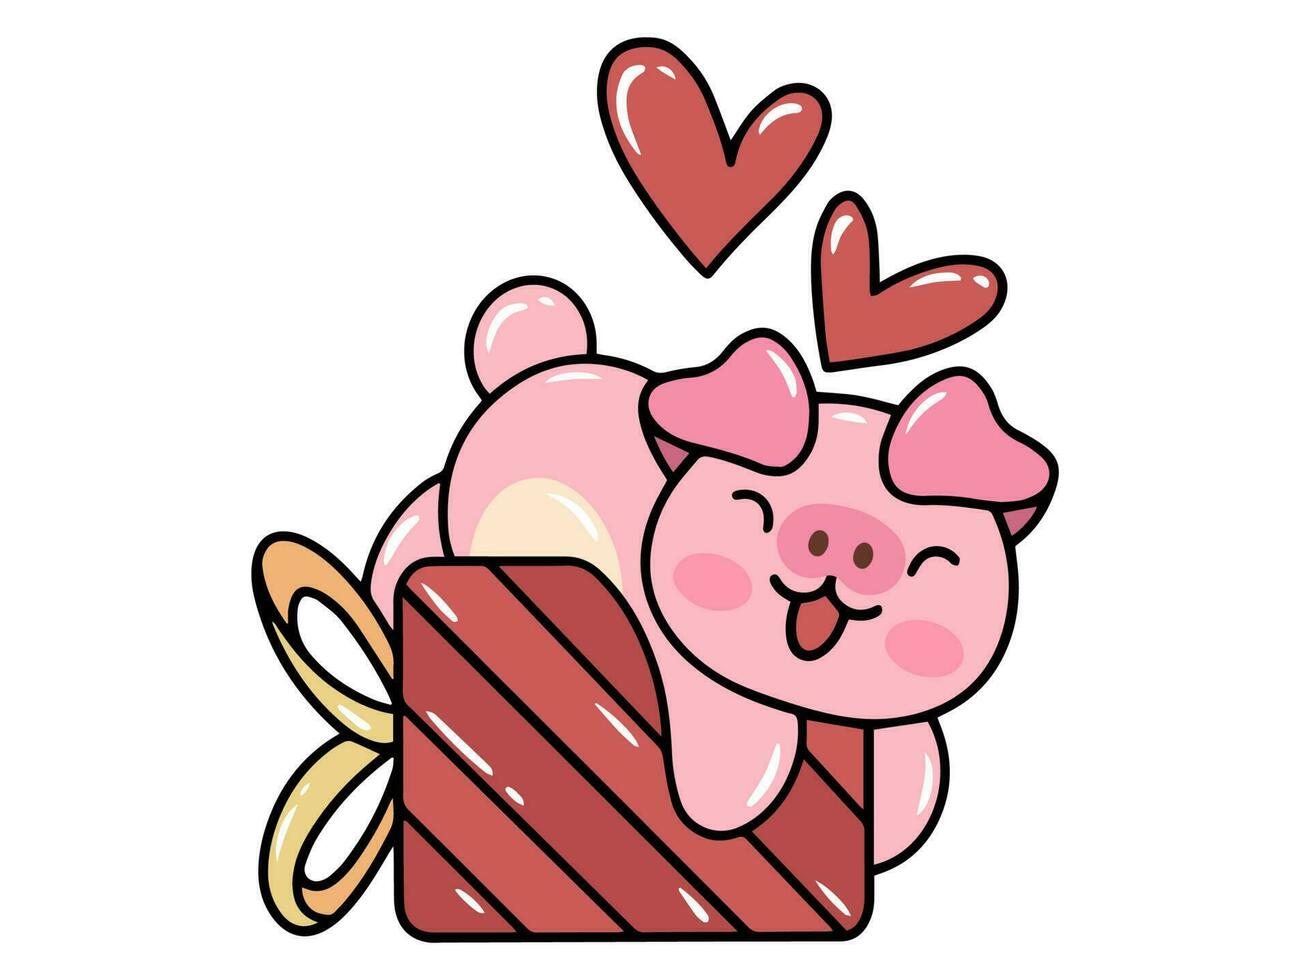 Pig Cartoon Cute for Valentines Day vector